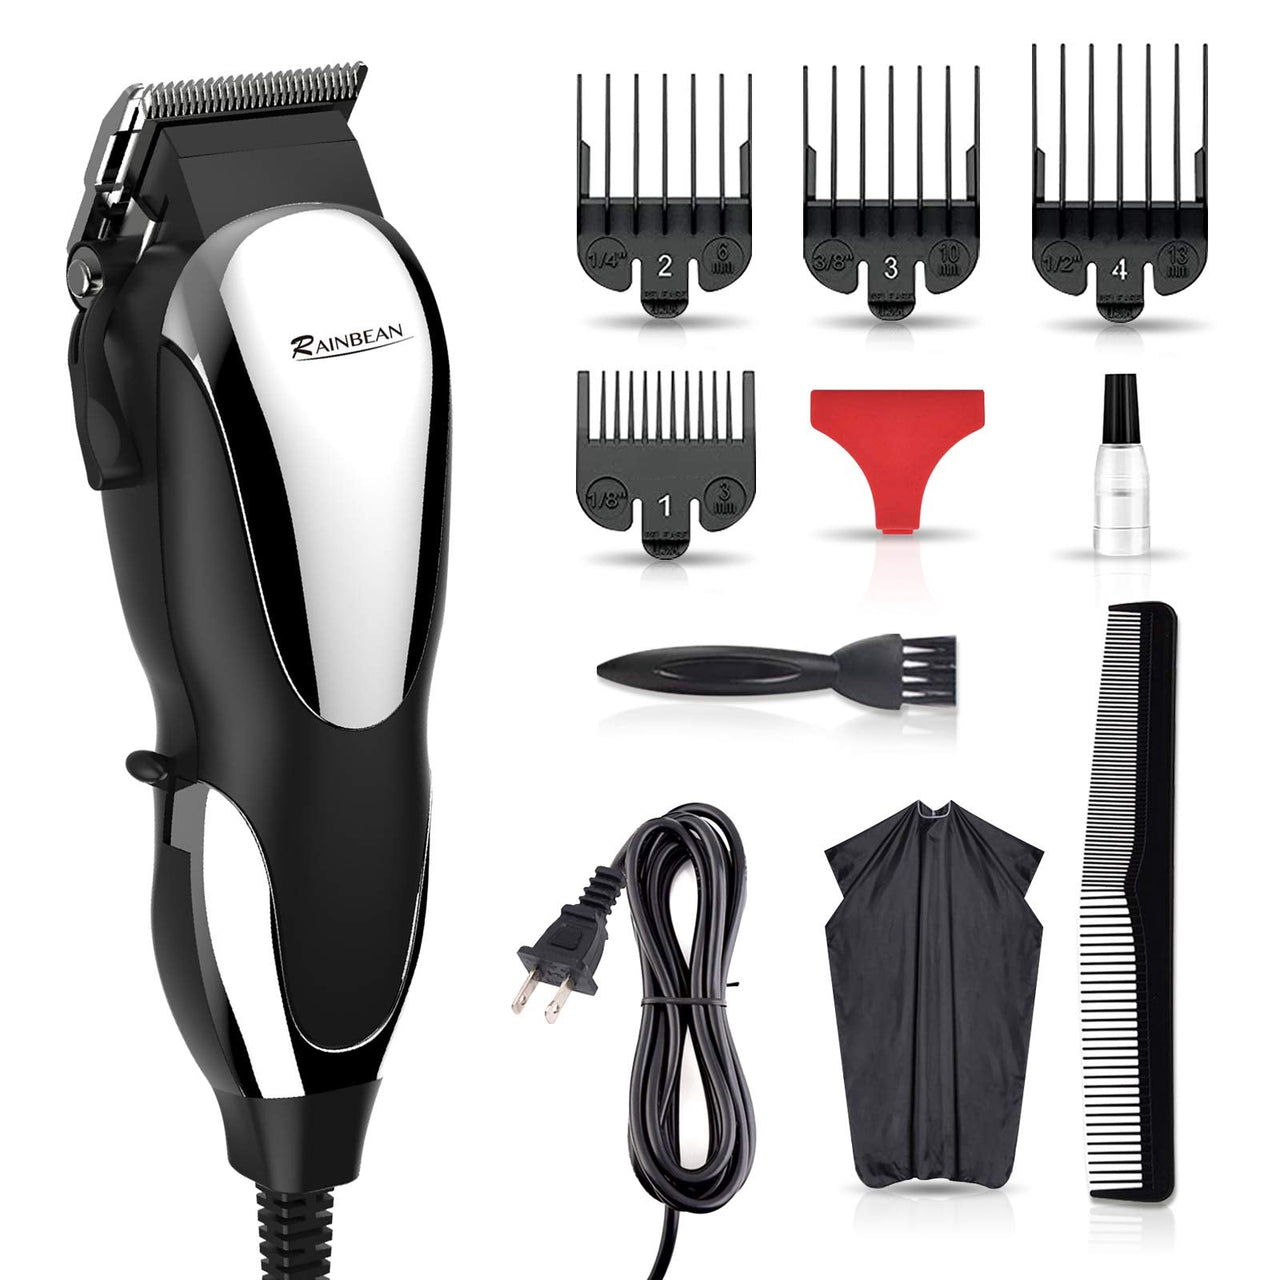 Professional Hair Clippers, Corded Hair Clippers for Men, Kids, Strong Motor Barber Salon Complete Hair and Beard, Clipping and Trimming Kit - InspiredGrabs.com